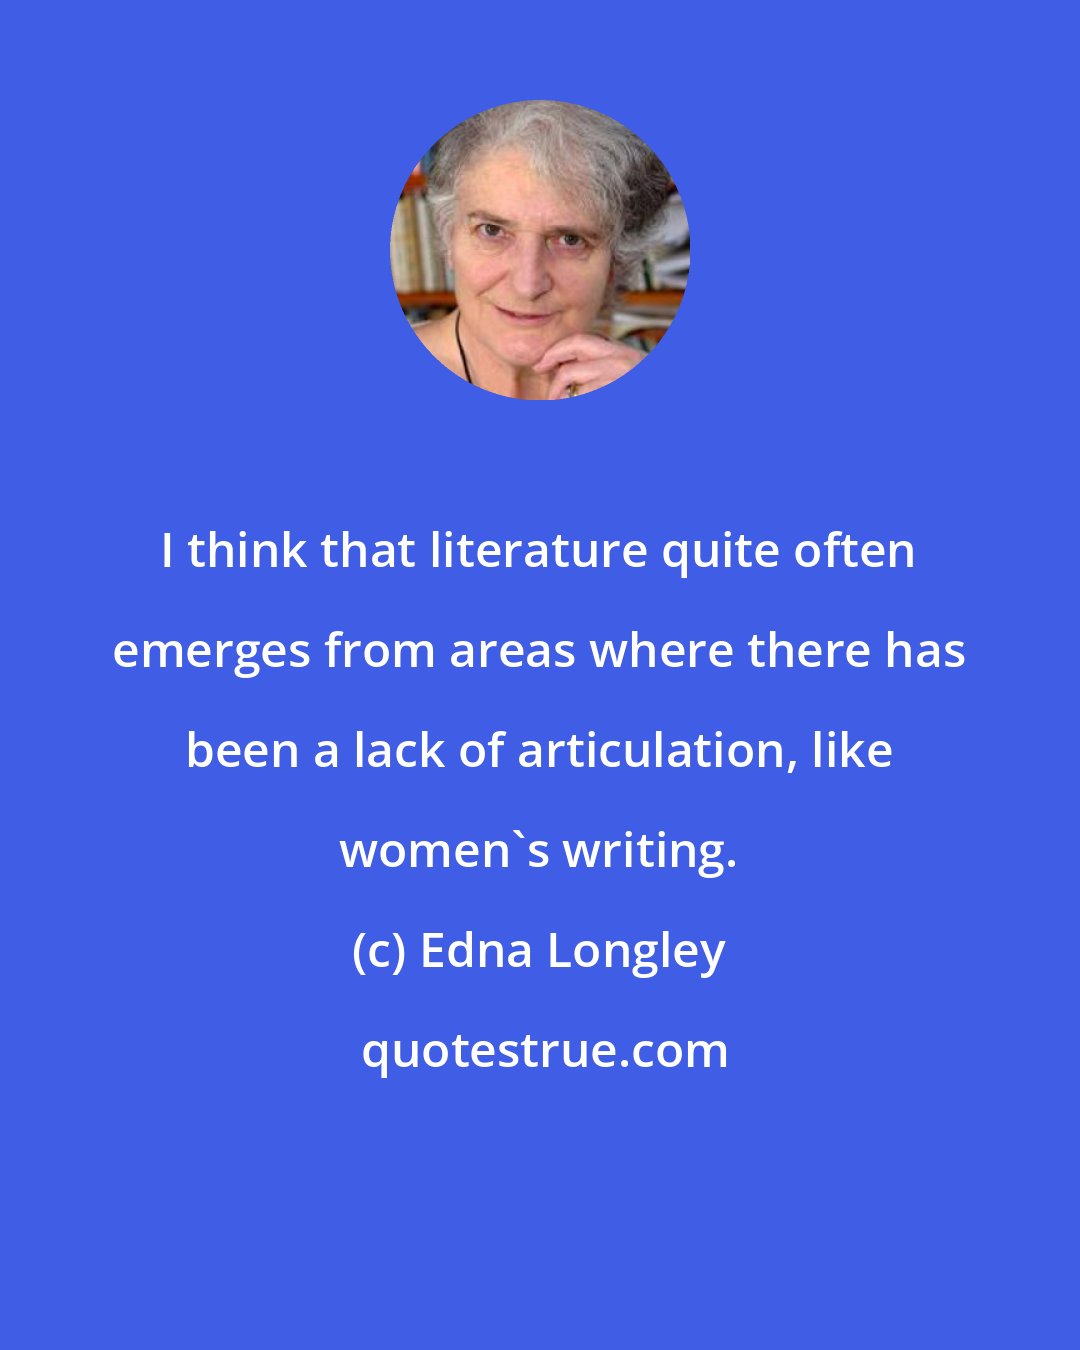 Edna Longley: I think that literature quite often emerges from areas where there has been a lack of articulation, like women's writing.